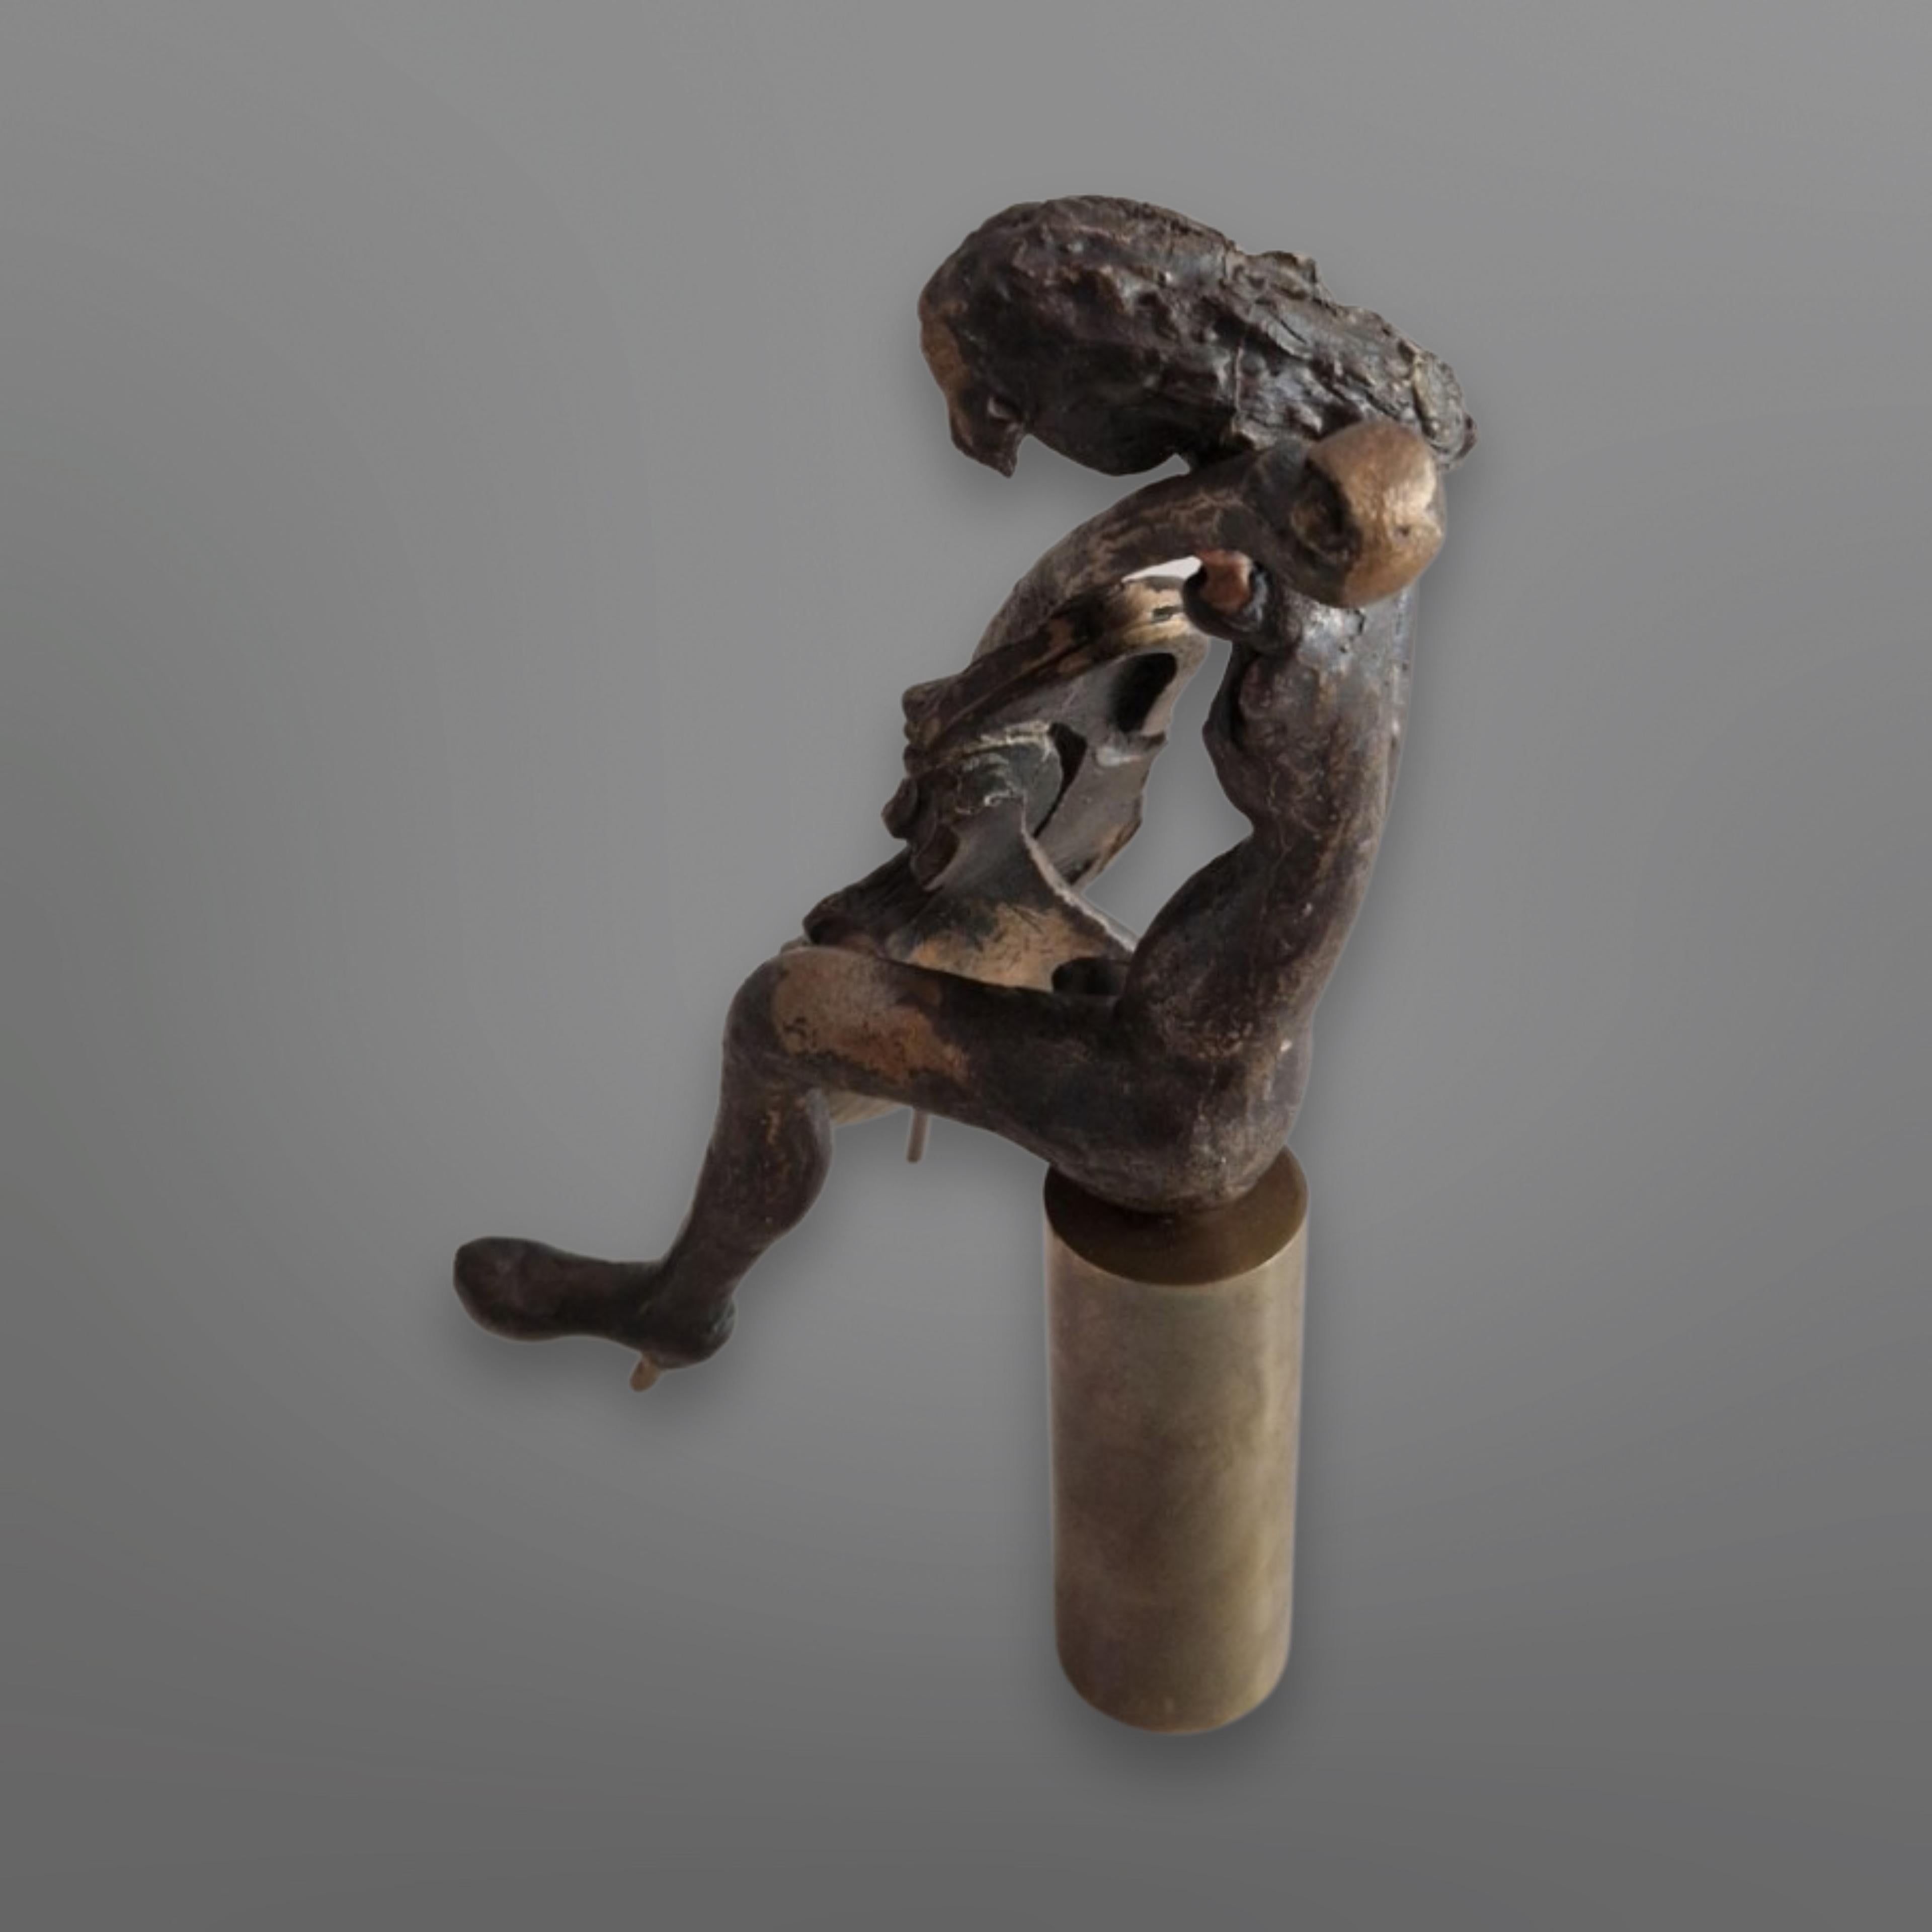 Small cast bronze  abstract statue. It depicts a female cello player sitting on a round stool. It is designed in the style of Yves Lohé. No signature or markings visible. 

- Abstract art uses visual language of shape, form, color and line to create